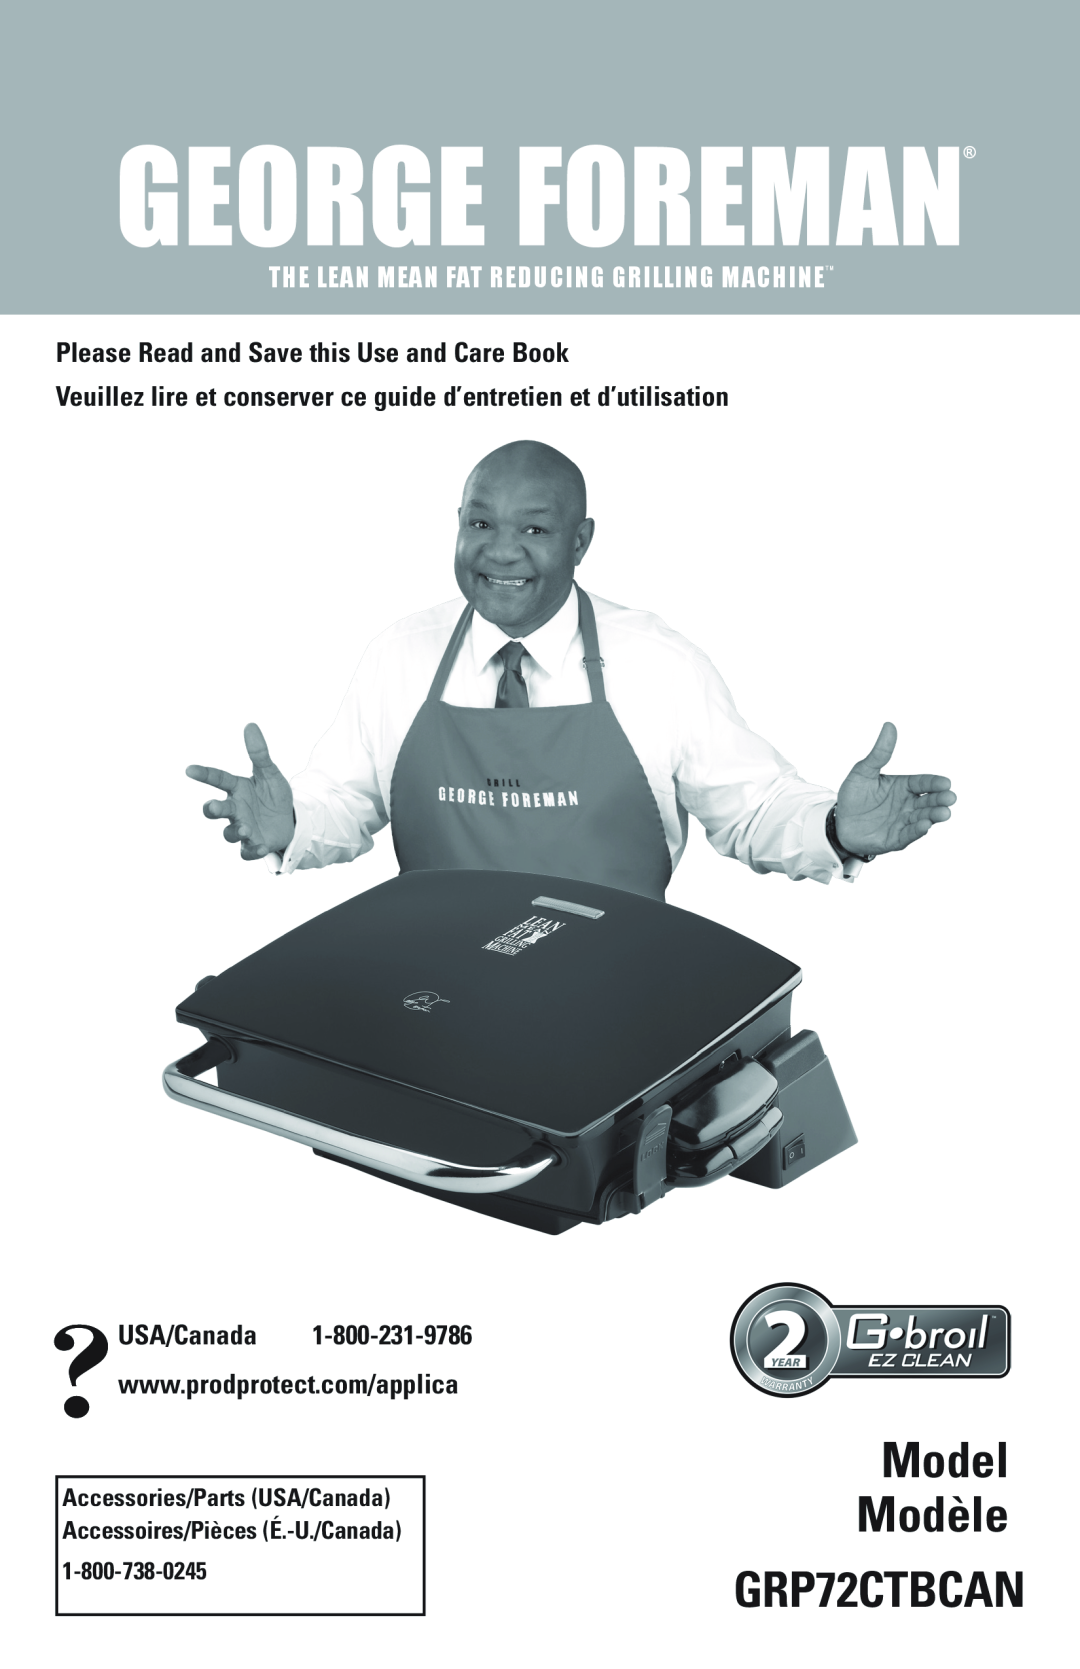 George Foreman GRP72CTBCAN manual Model Modèle, The Lean Mean Fat Reducing Grilling Machinetm 